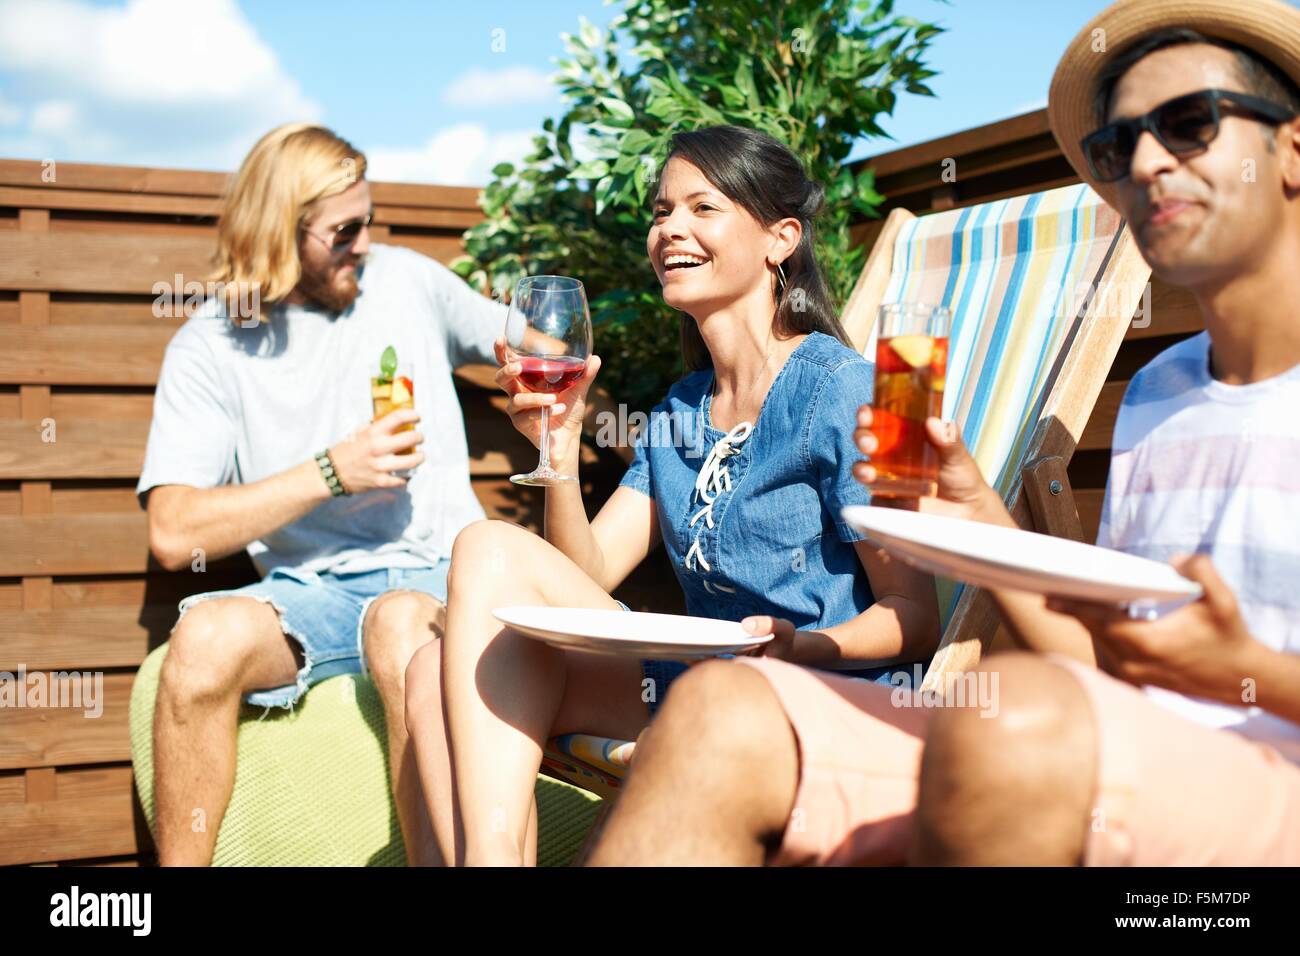 Adult friends sitting on deck chairs drinking at rooftop party Stock Photo